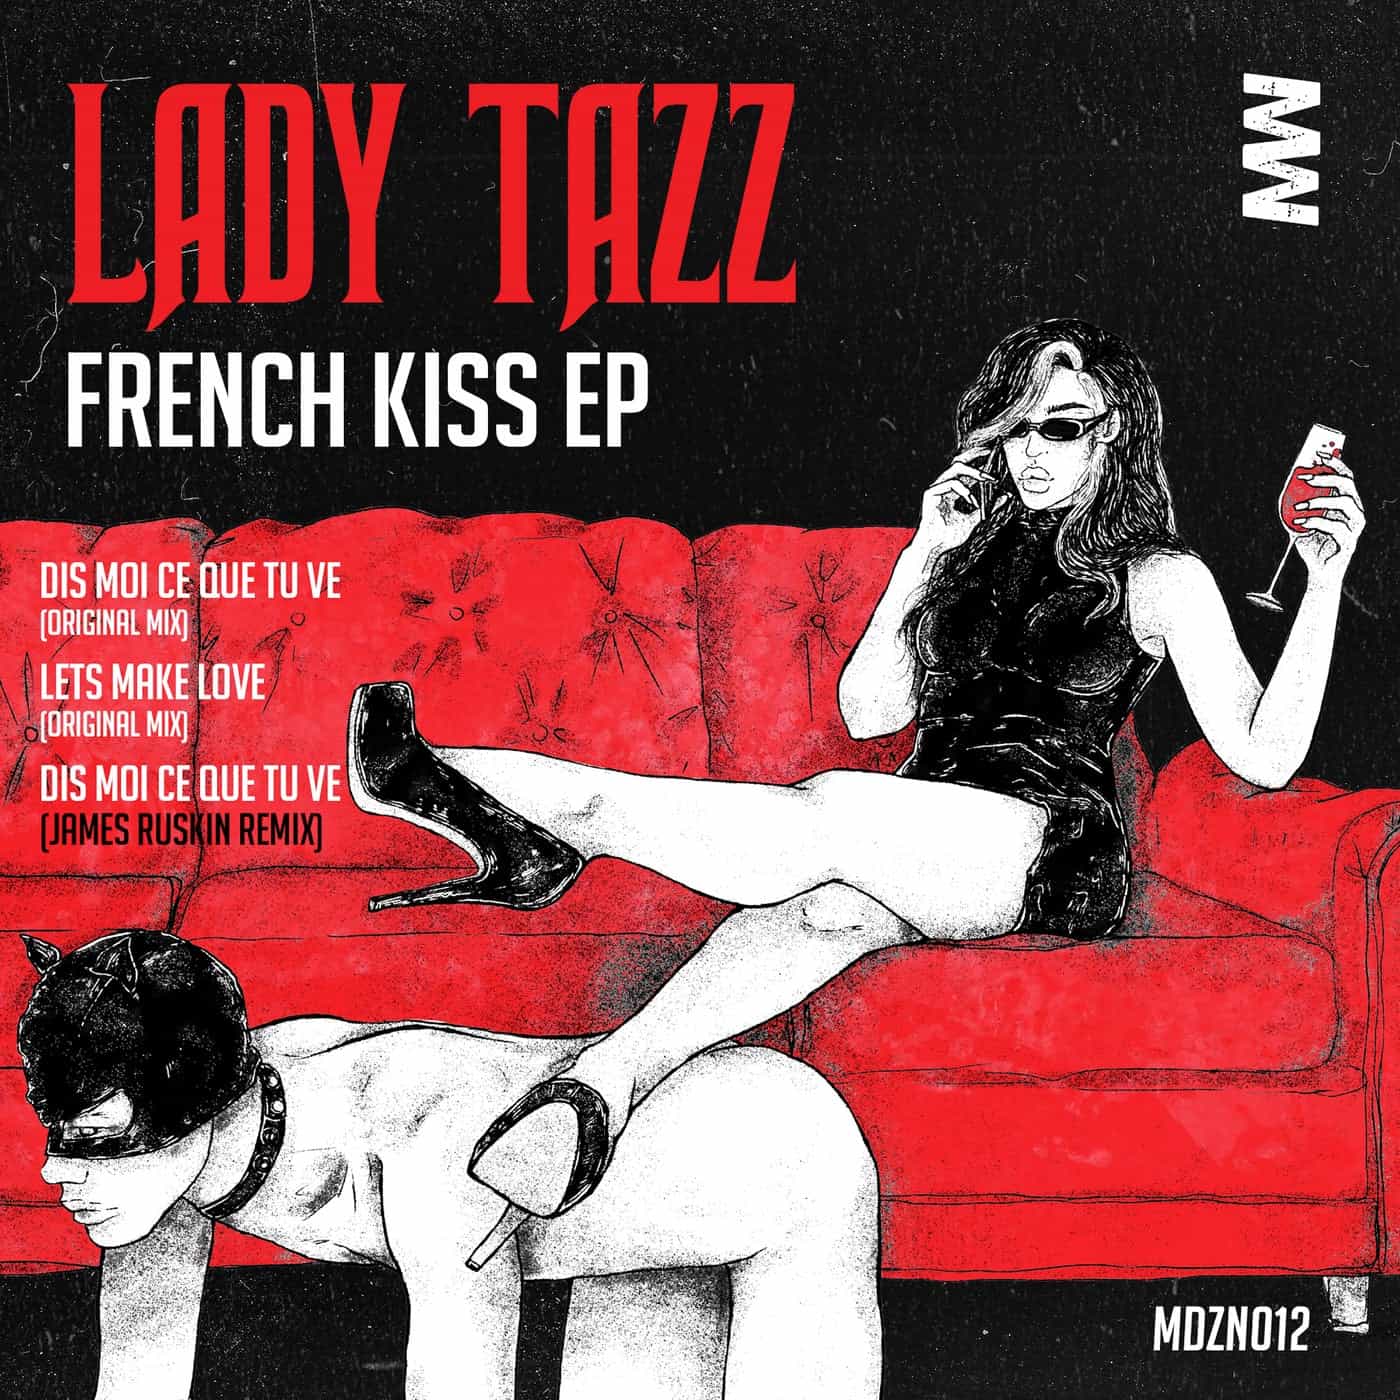 image cover: Lady Tazz - French Kiss EP / MDZN012